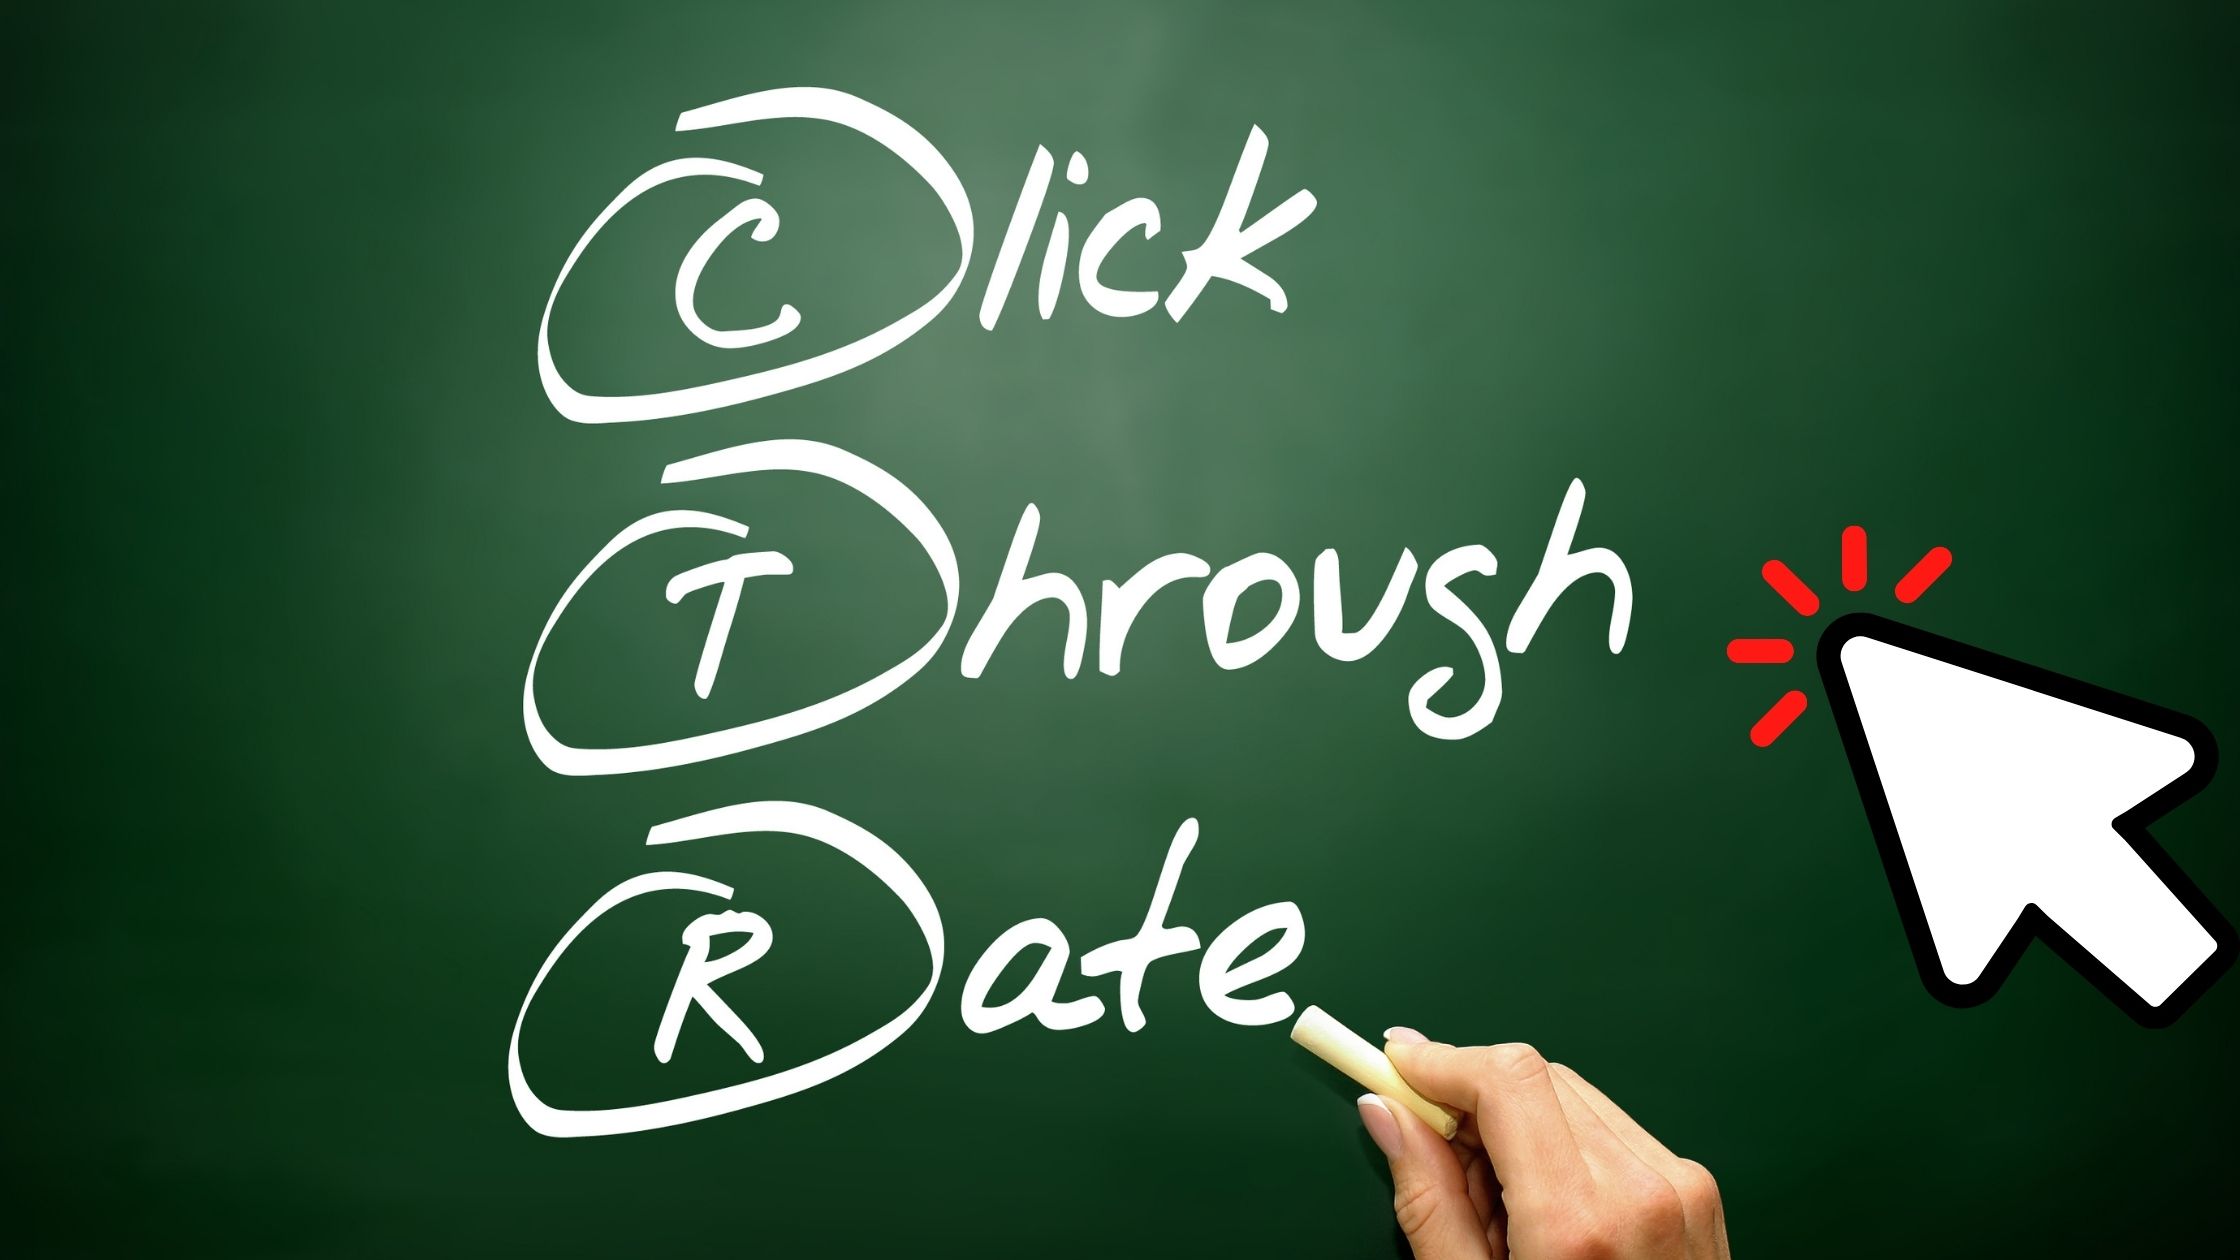 what is the average click rate for email marketing